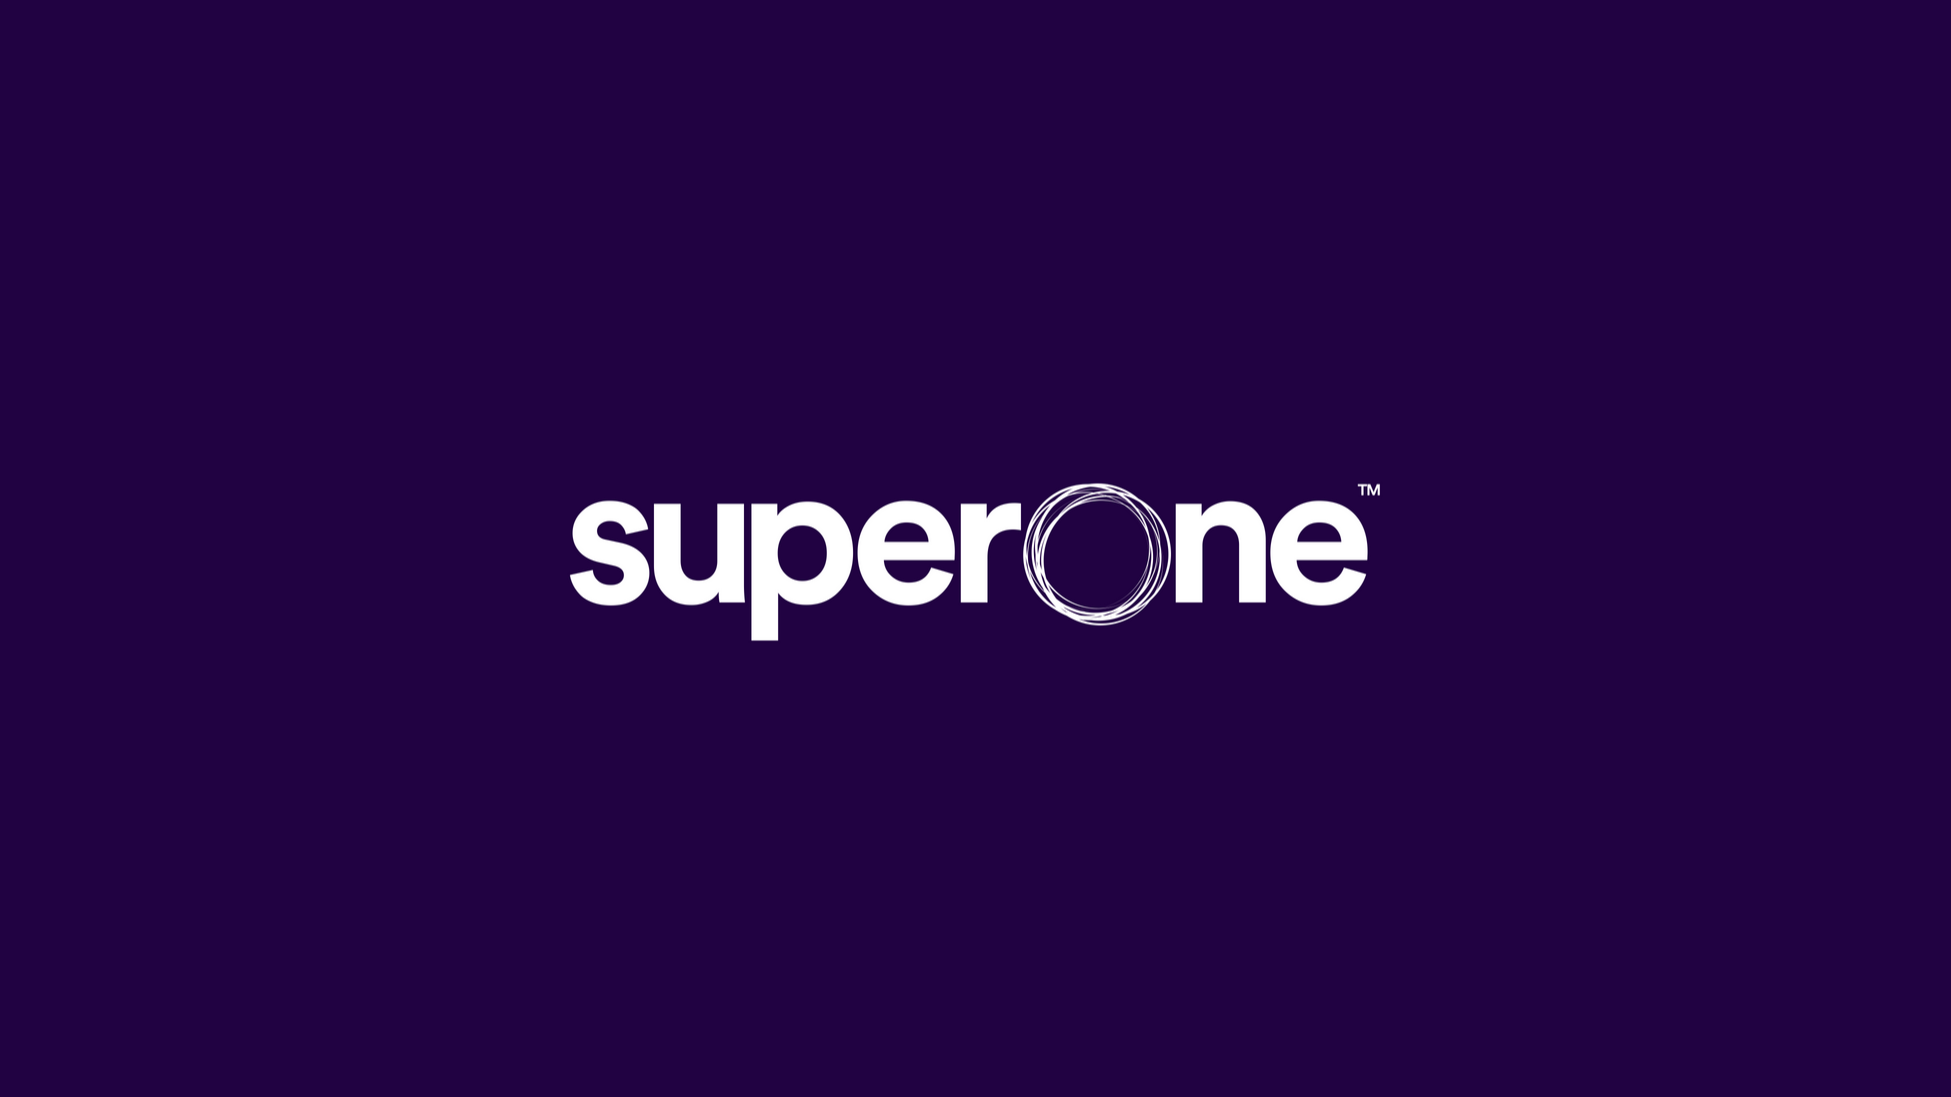 Superone Gaming App gains Support From Affiliate Group The Smart Gamers Club